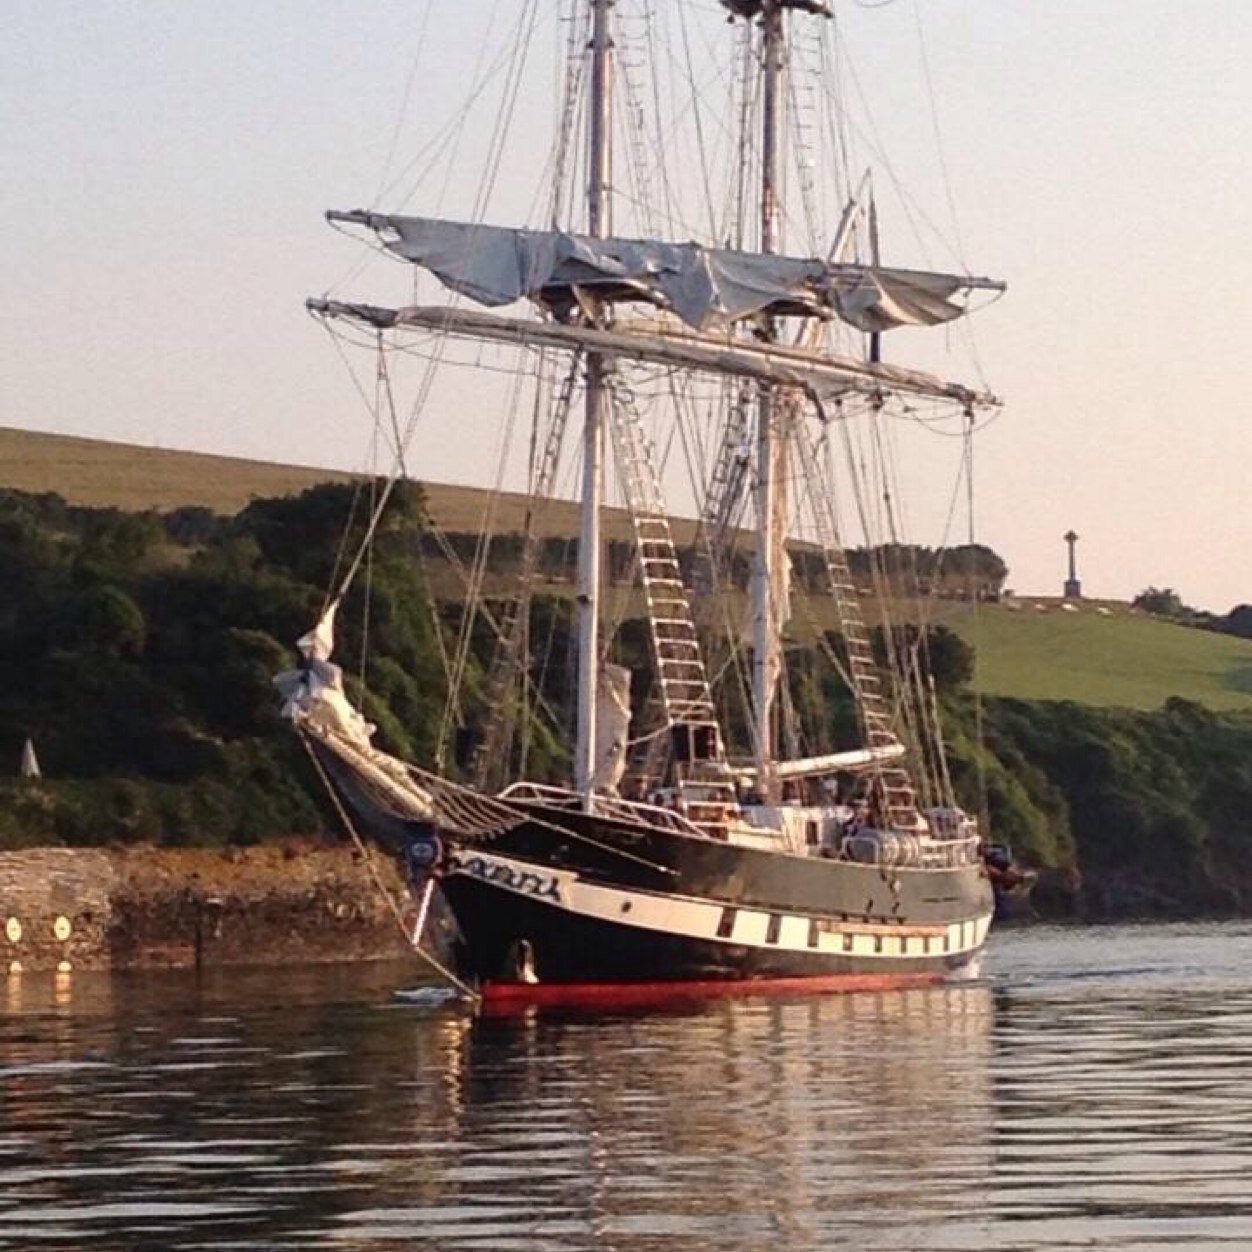 Unofficial account of Padstow Harbour. All views expressed are my own